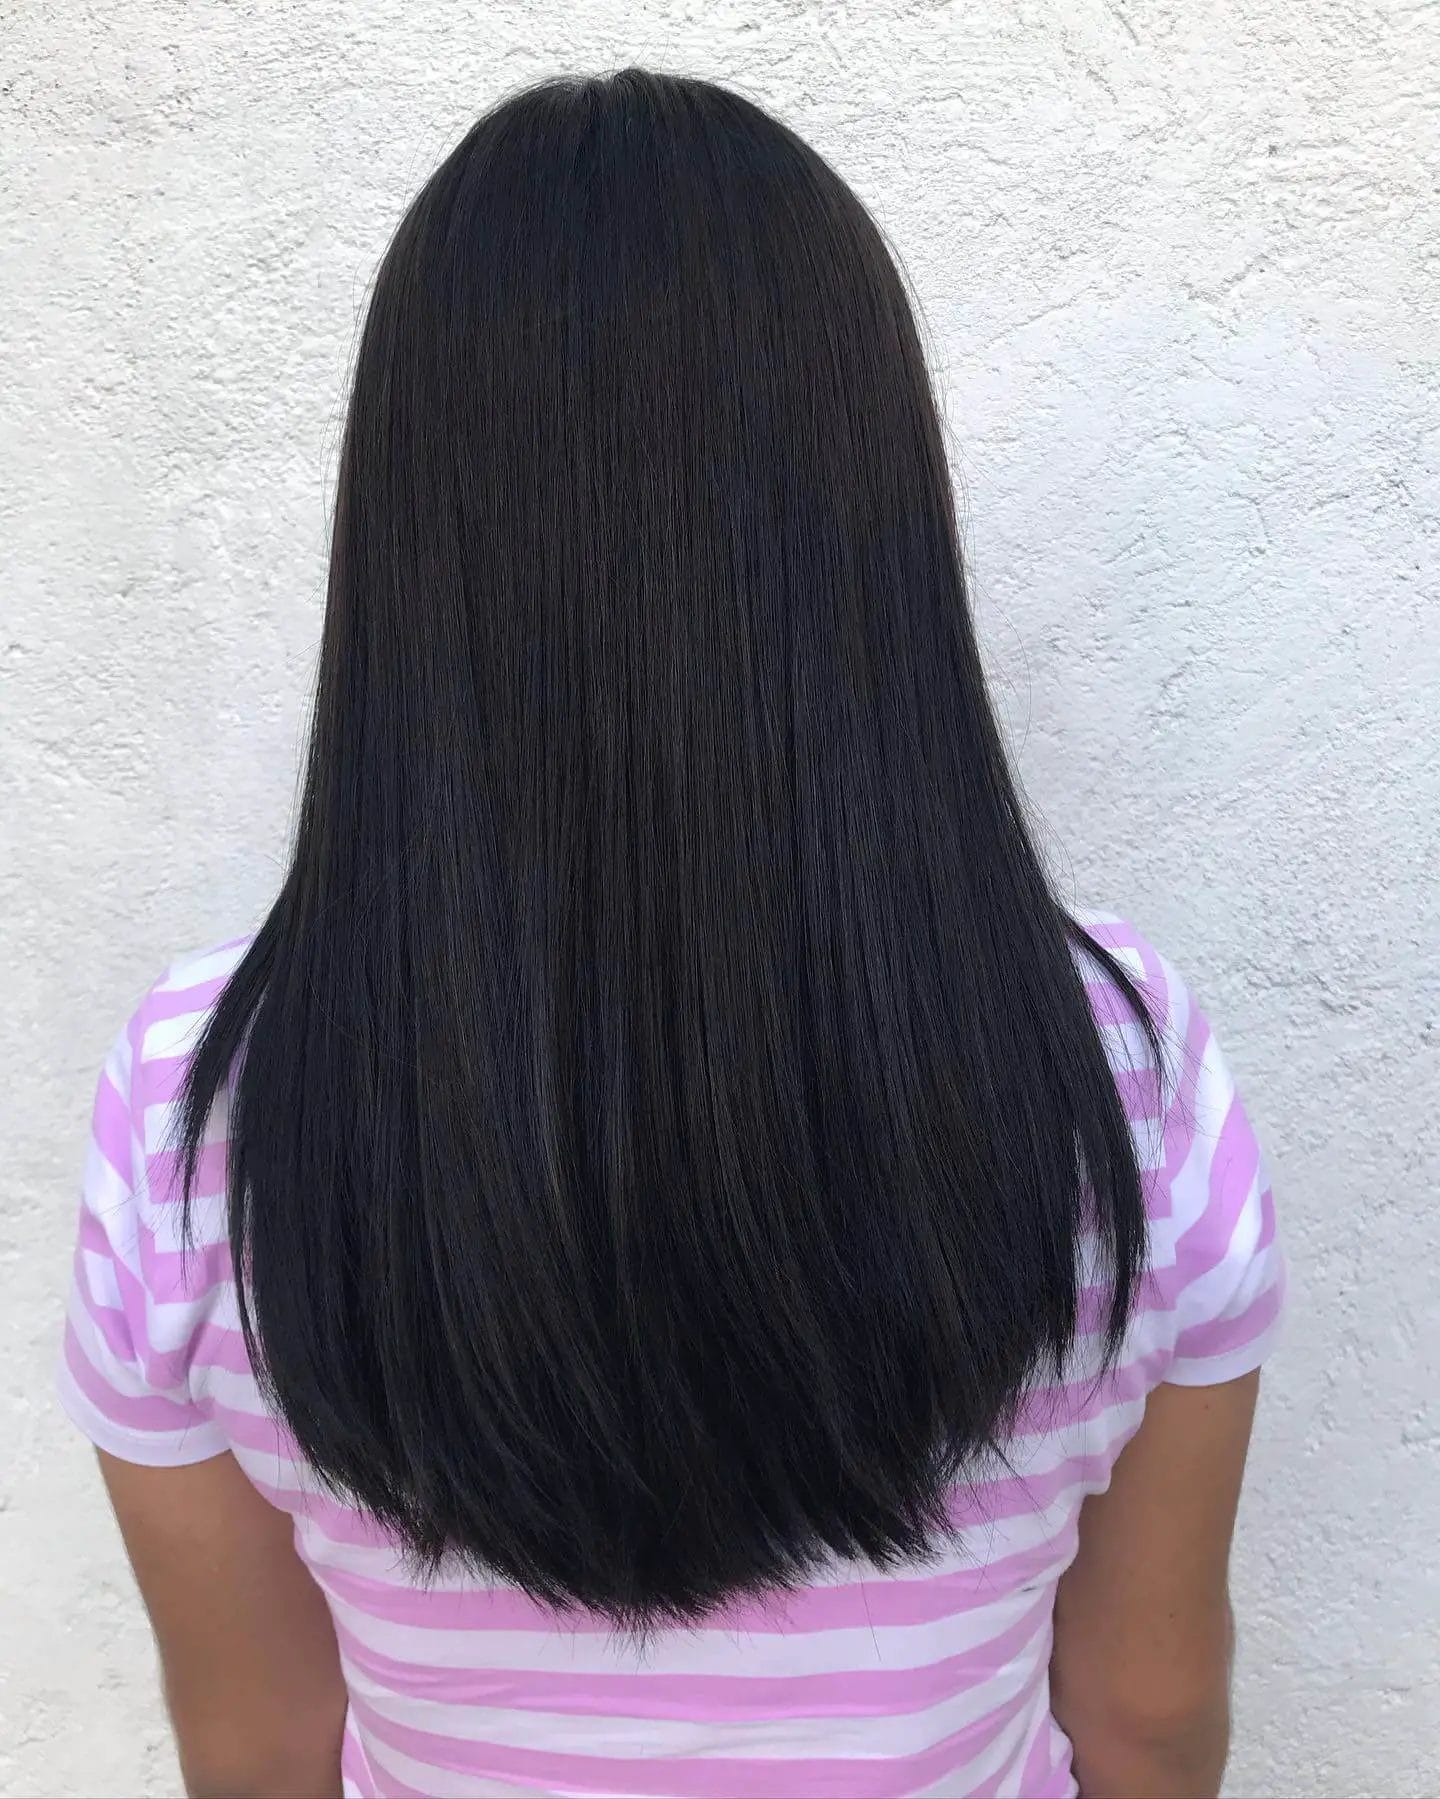 Deep lustrous U-shaped haircut with uniform tone and graceful layered movement.
